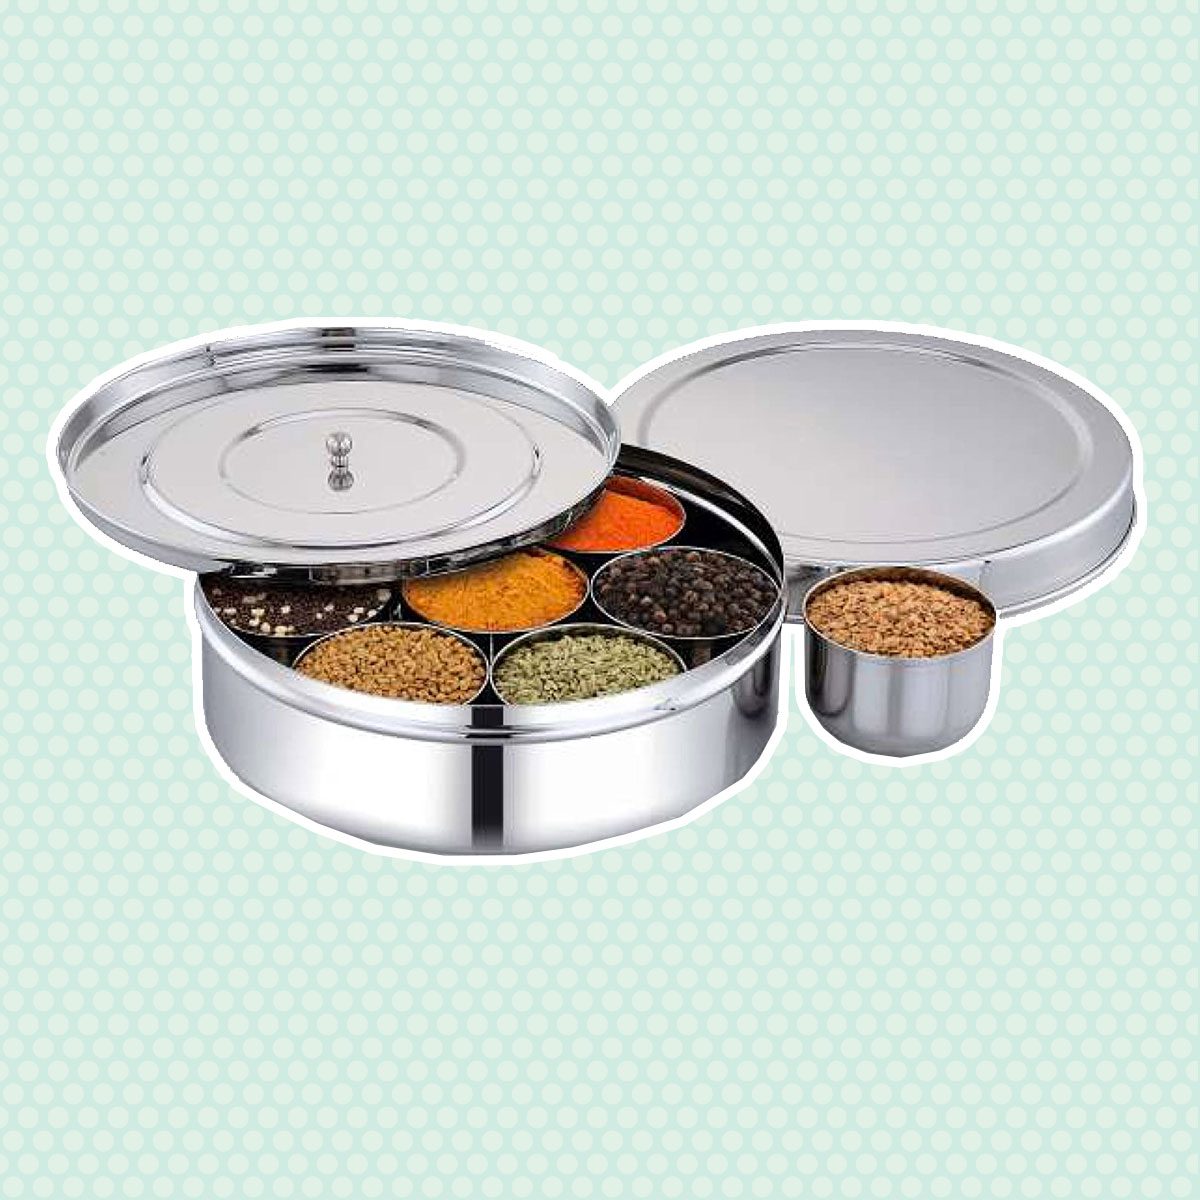 15 Essential Indian Cooking Tools for Your Kitchen